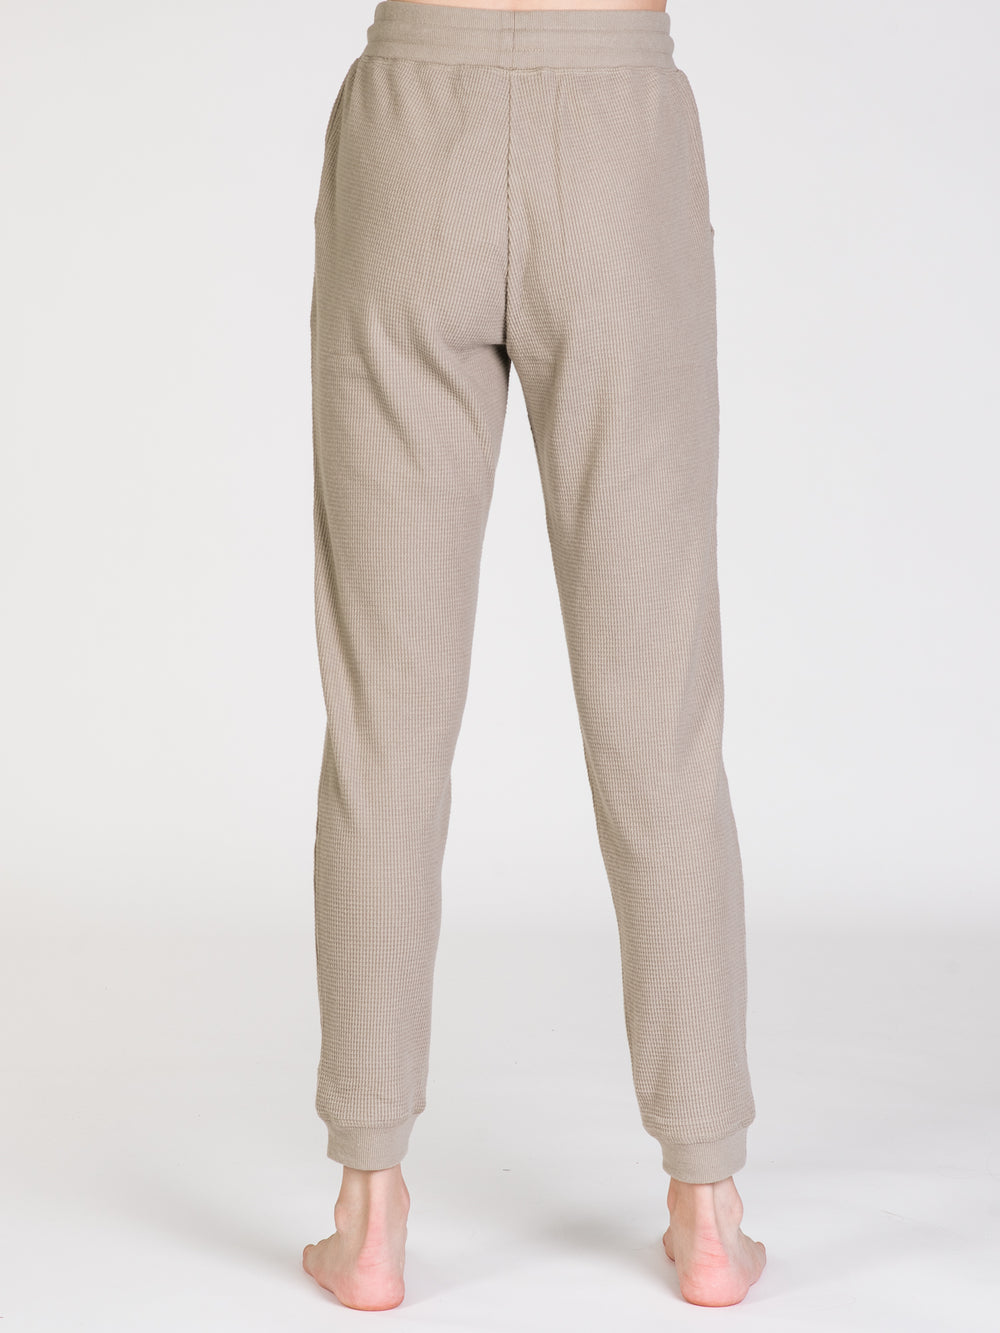 HARLOW OLIVE THERMAL JOGGER - CLEARANCE